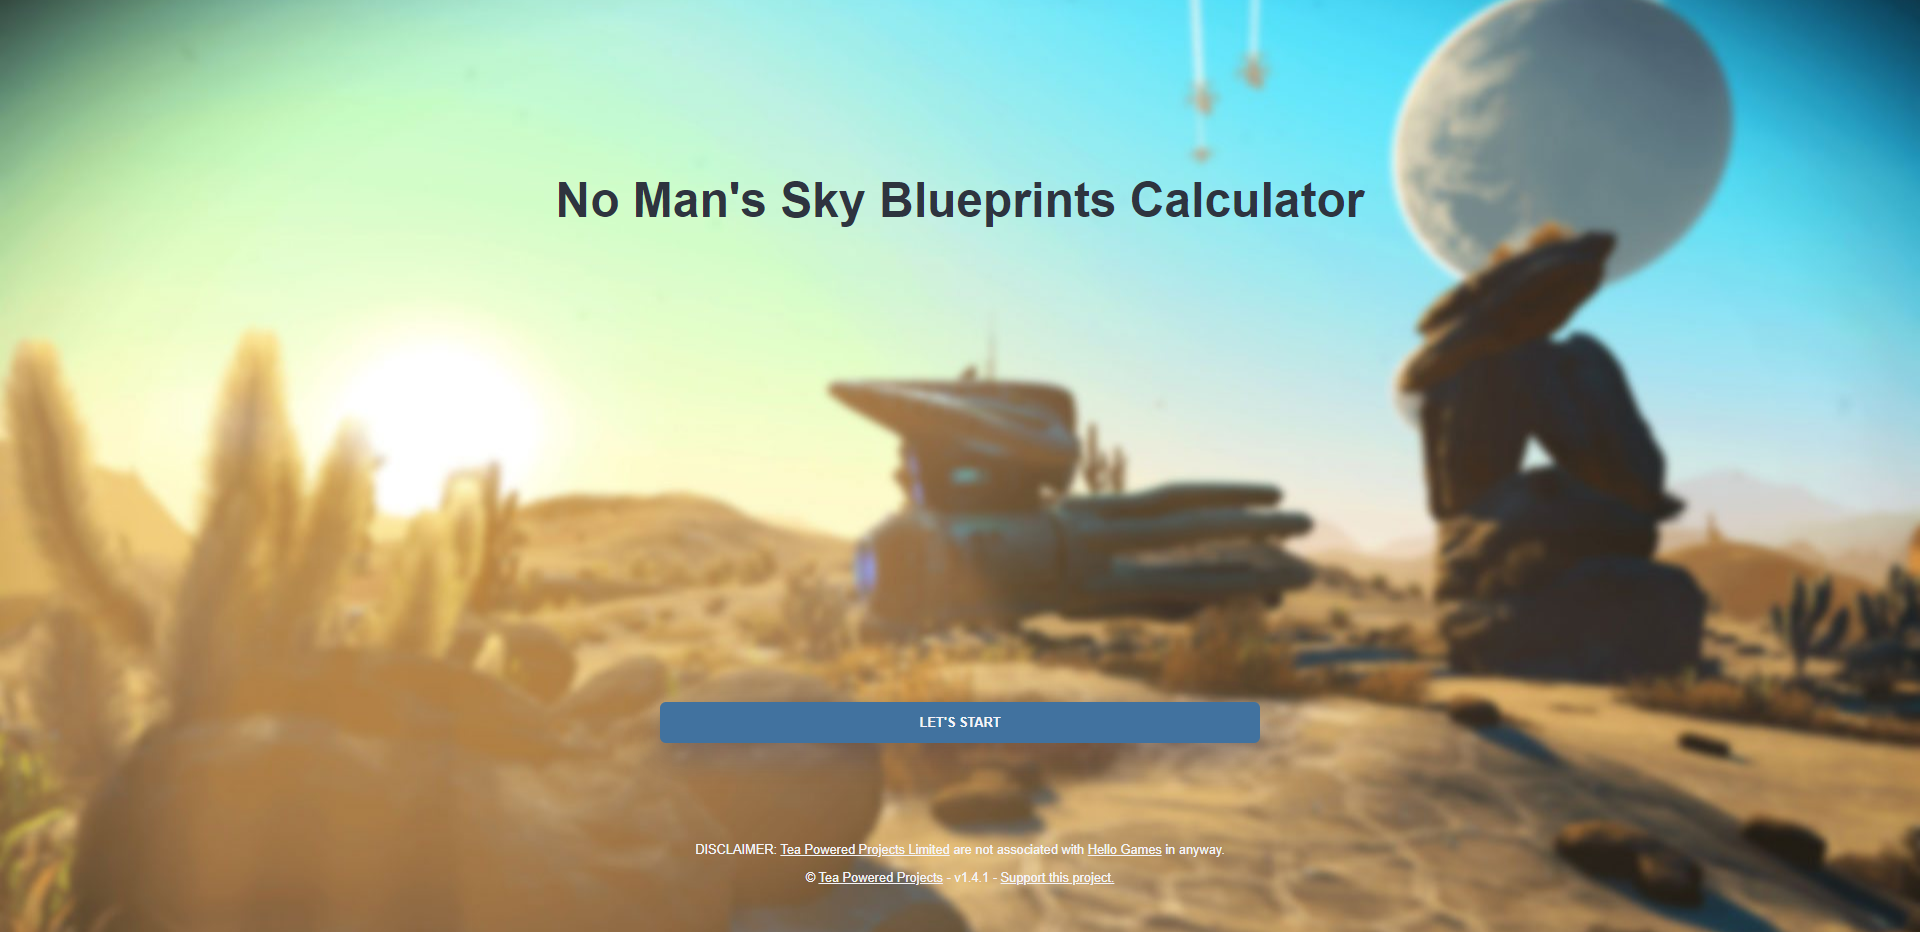 A No Man Sky Calculator Development project by Tea Powered Projects